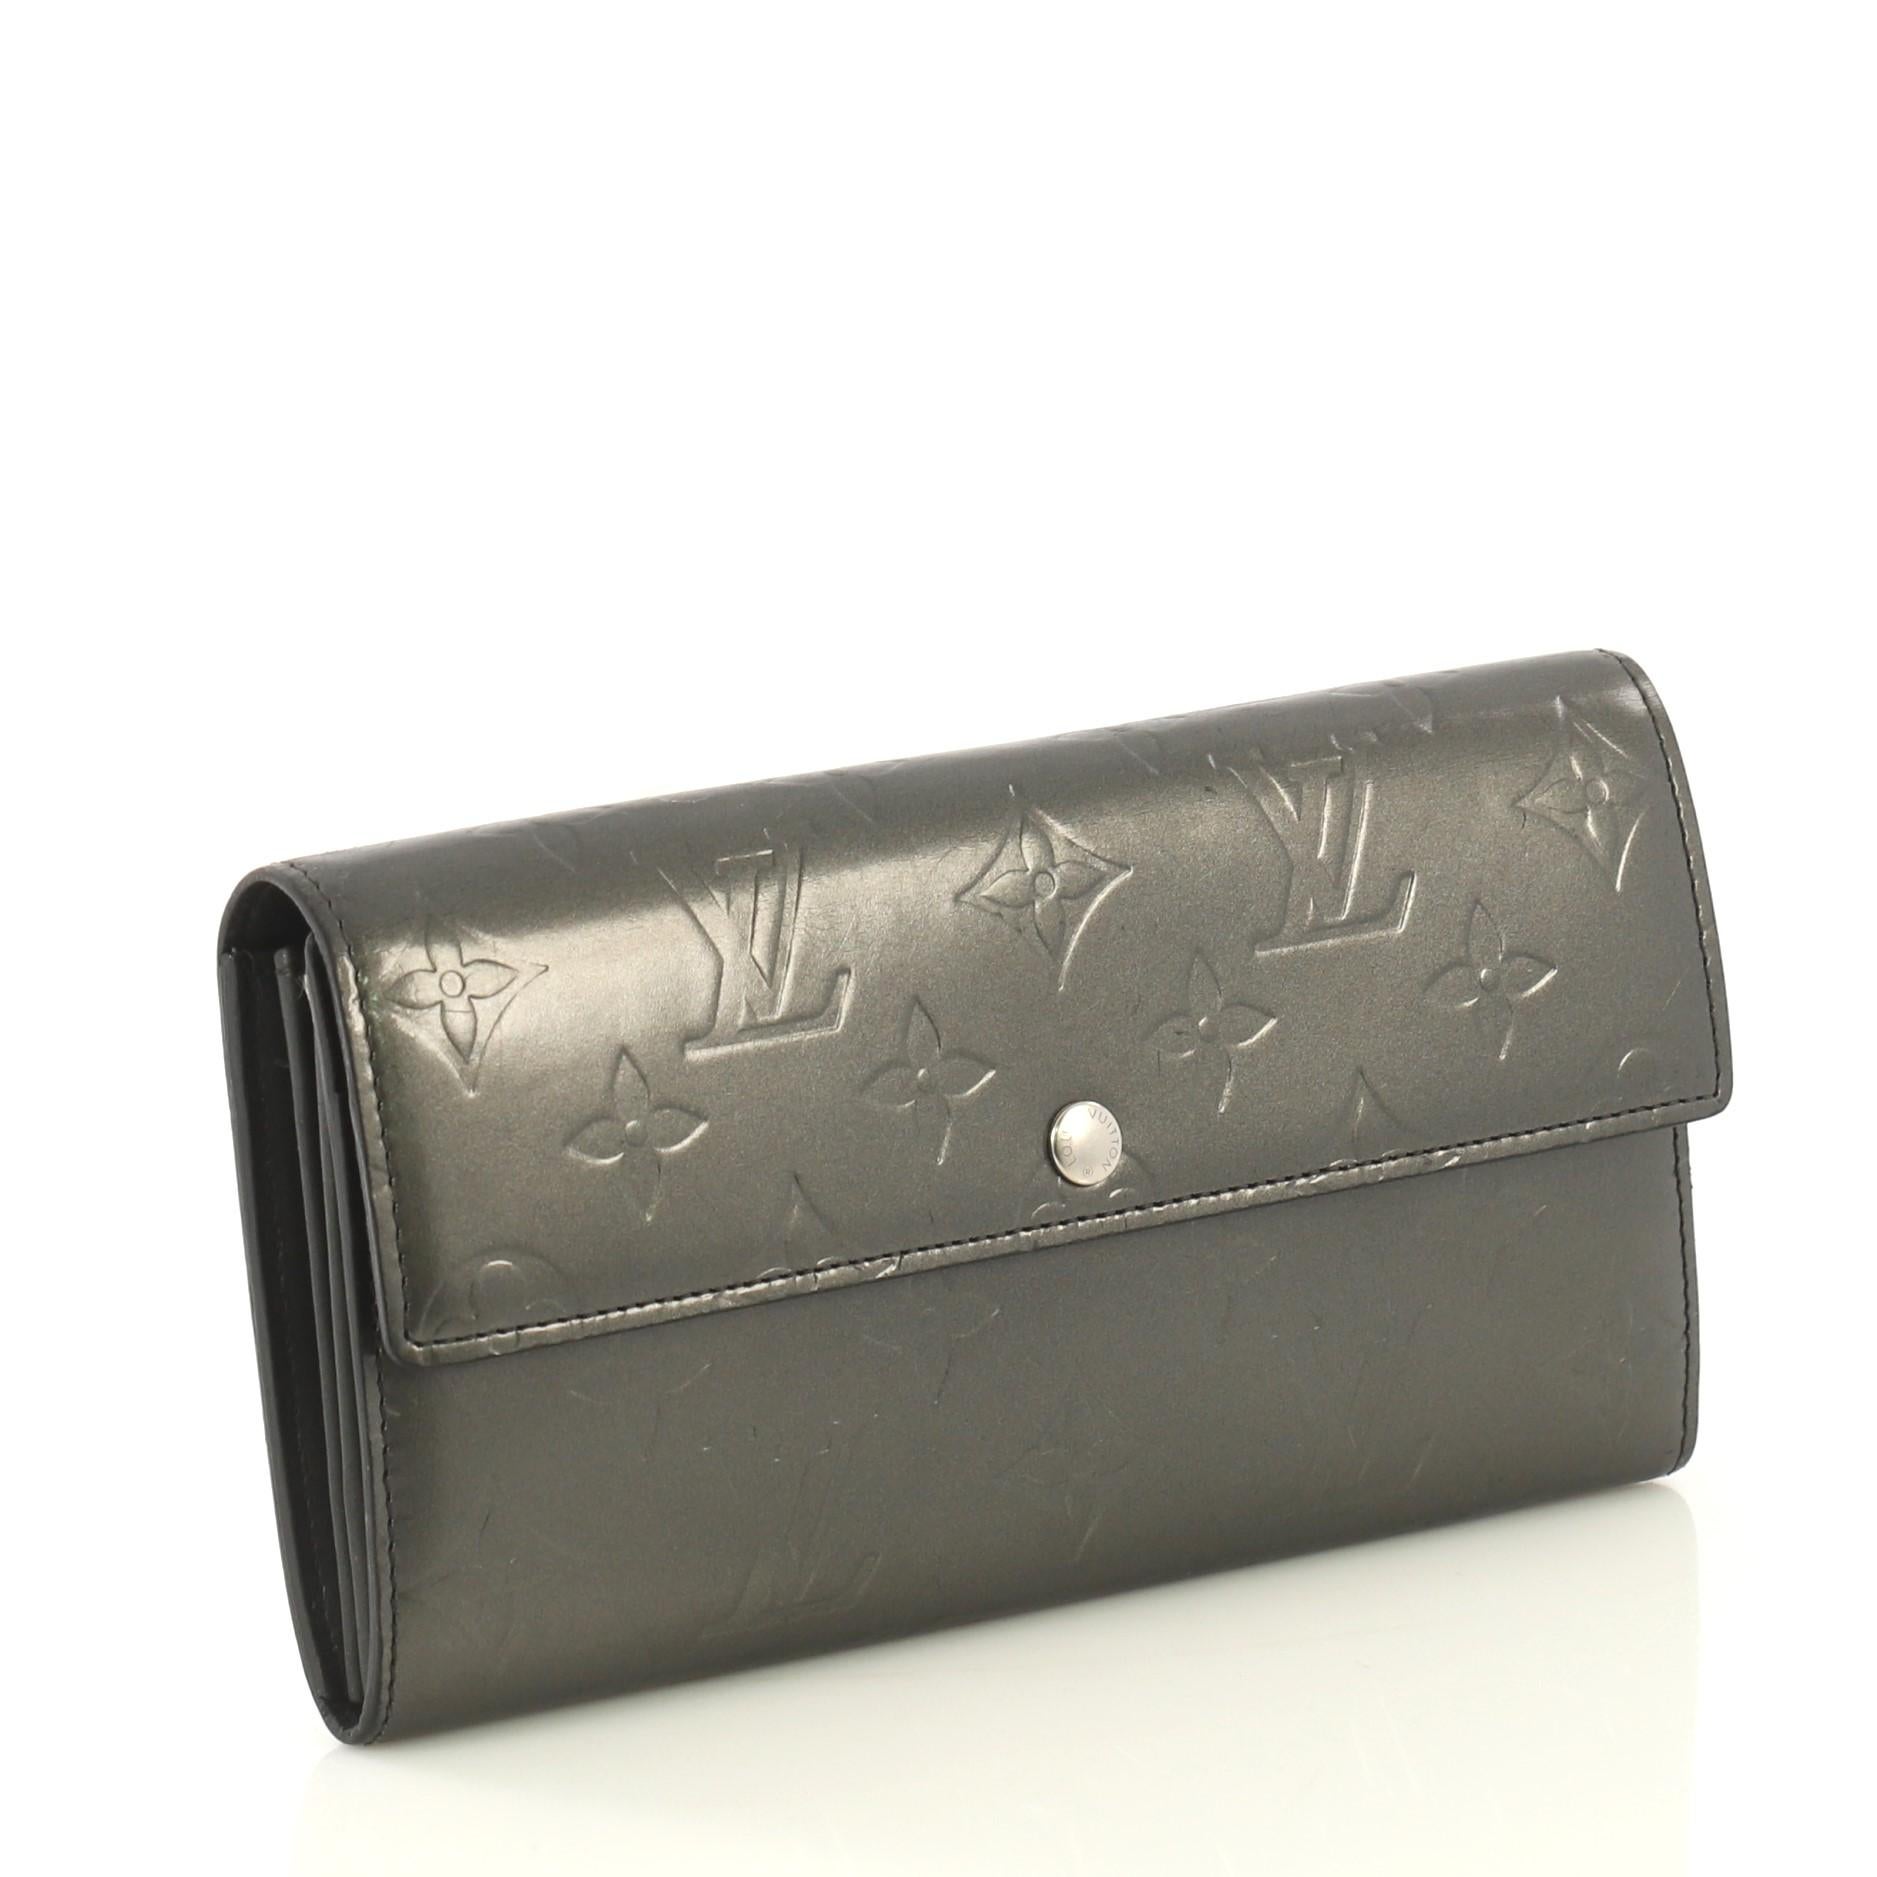 This Louis Vuitton Sarah Wallet Monogram Vernis, crafted in gray monogram vernis leather, features silver-tone hardware. Its snap button closure opens to a gray leather interior with multiple card slots and a middle zip compartment. Authenticity